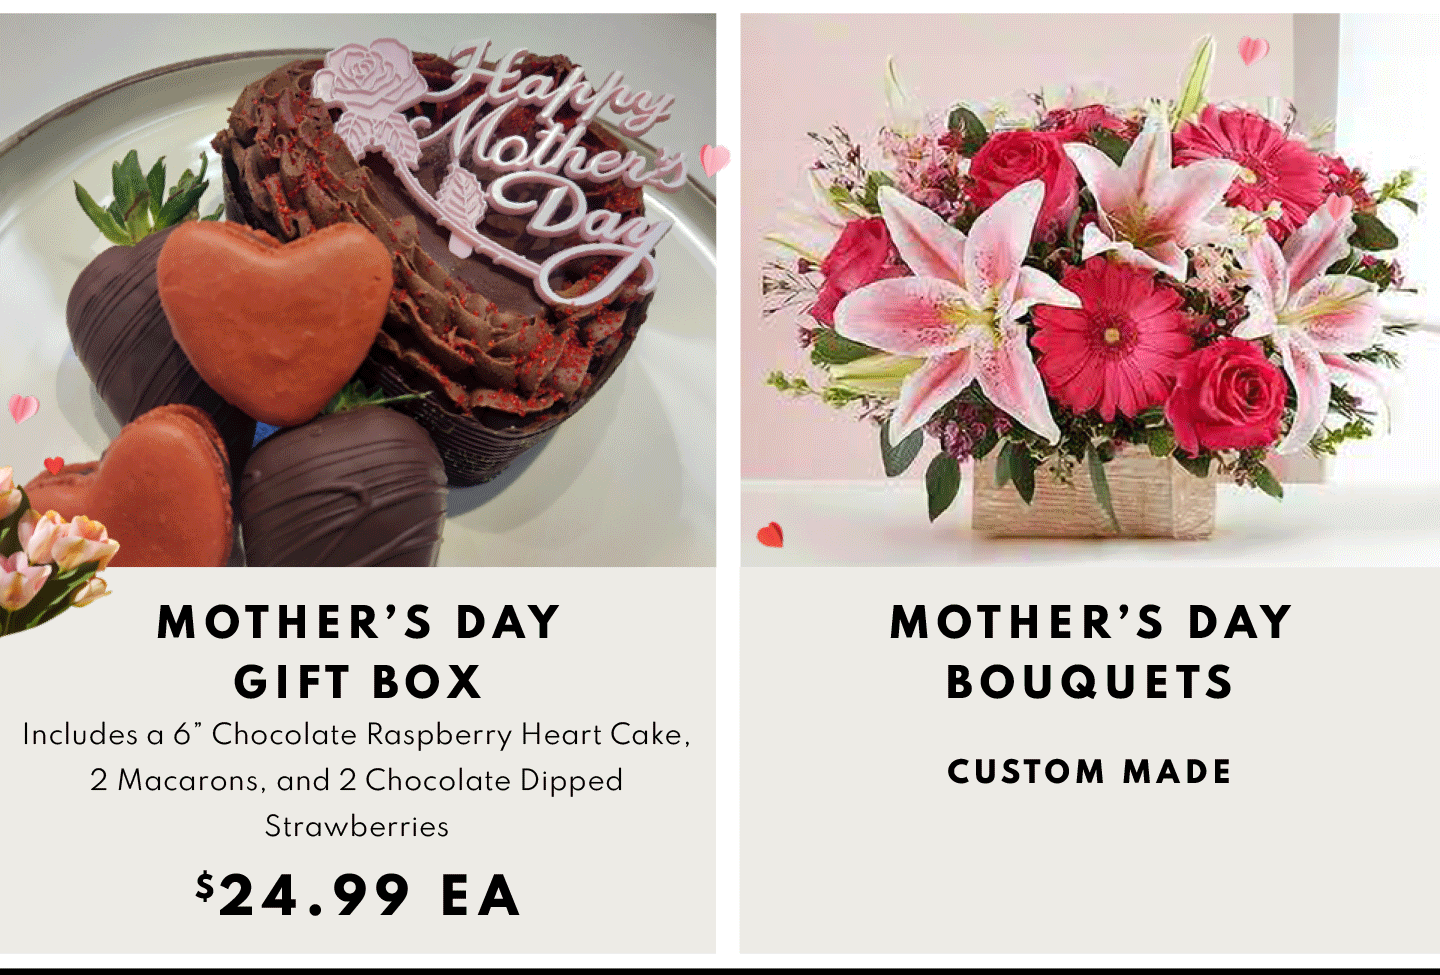 Mother's Day Gift Box $24.99 ea and Mother's Day BOuquet Custom Made